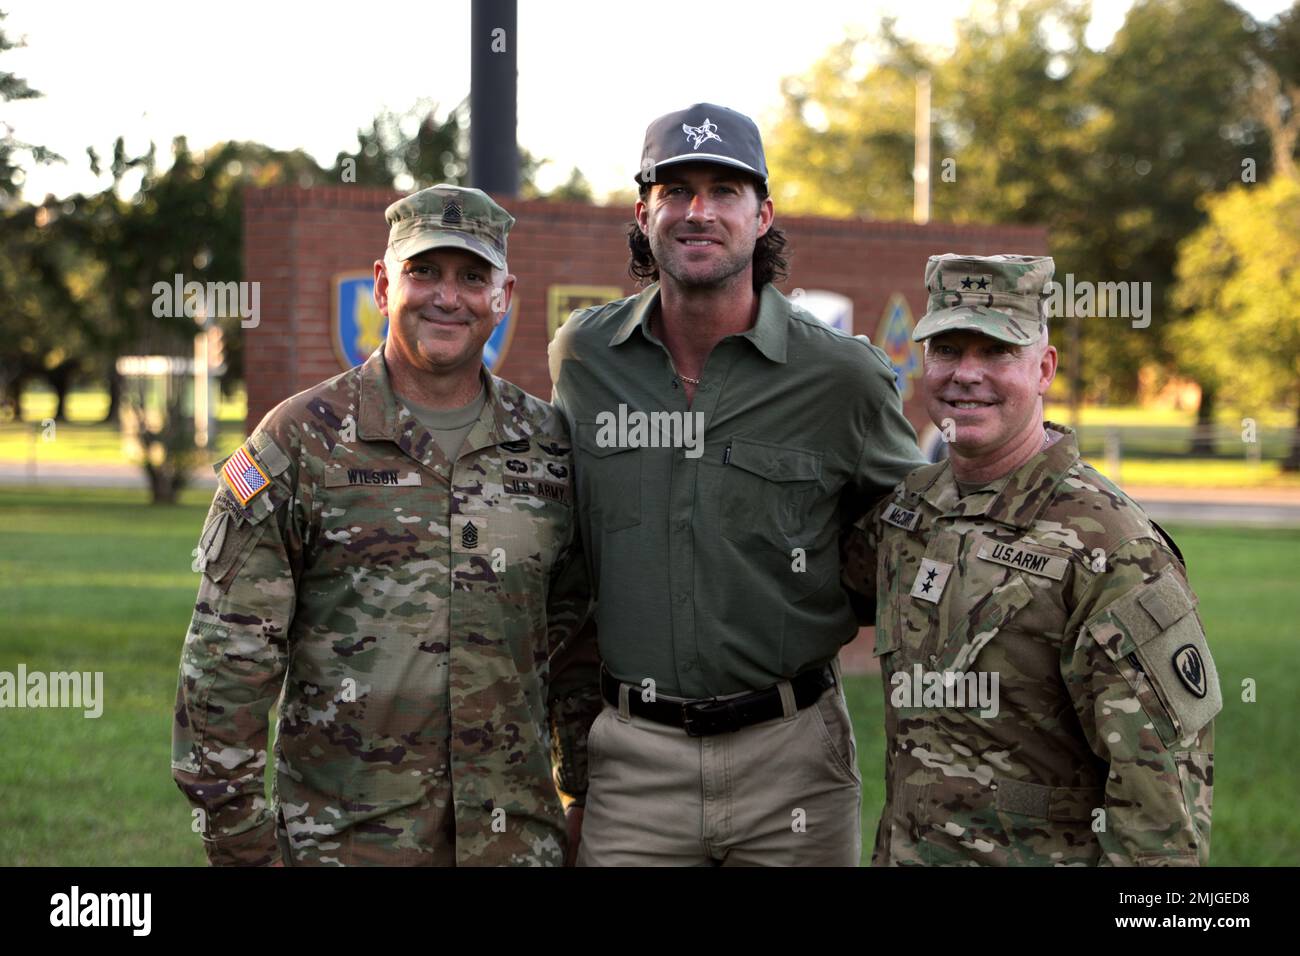 Maj. Gen. Michael McCurry, U.S. Army Aviation Center of Excellence and Fort Rucker commander, and Command Sgt. Maj. James D. Wilson, U.S. Army aviation branch command sergeant major, stand with country music singer Riley Green at Fort Rucker, Alabama, August 29, 2022. Stock Photo